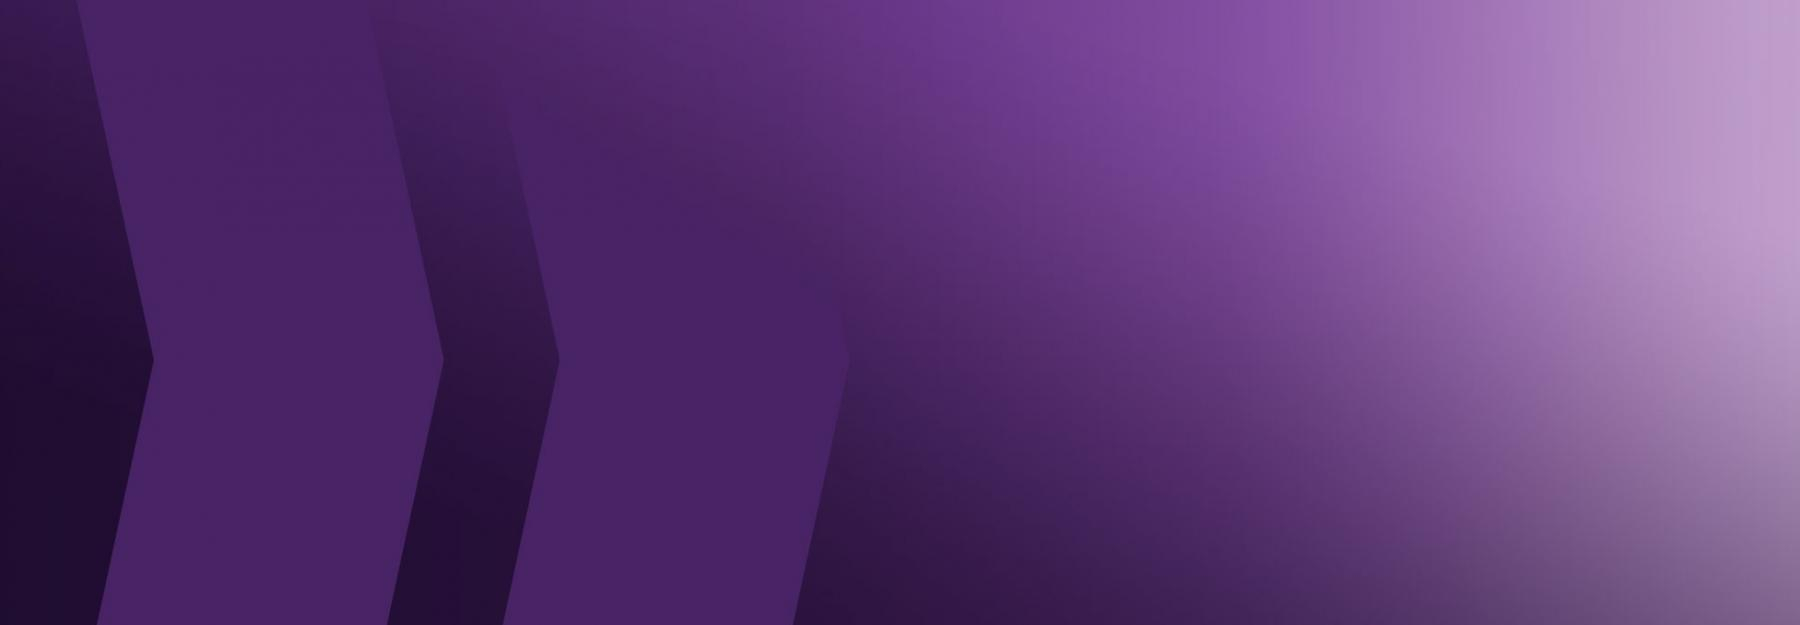 Purple gradient banner with two arrows